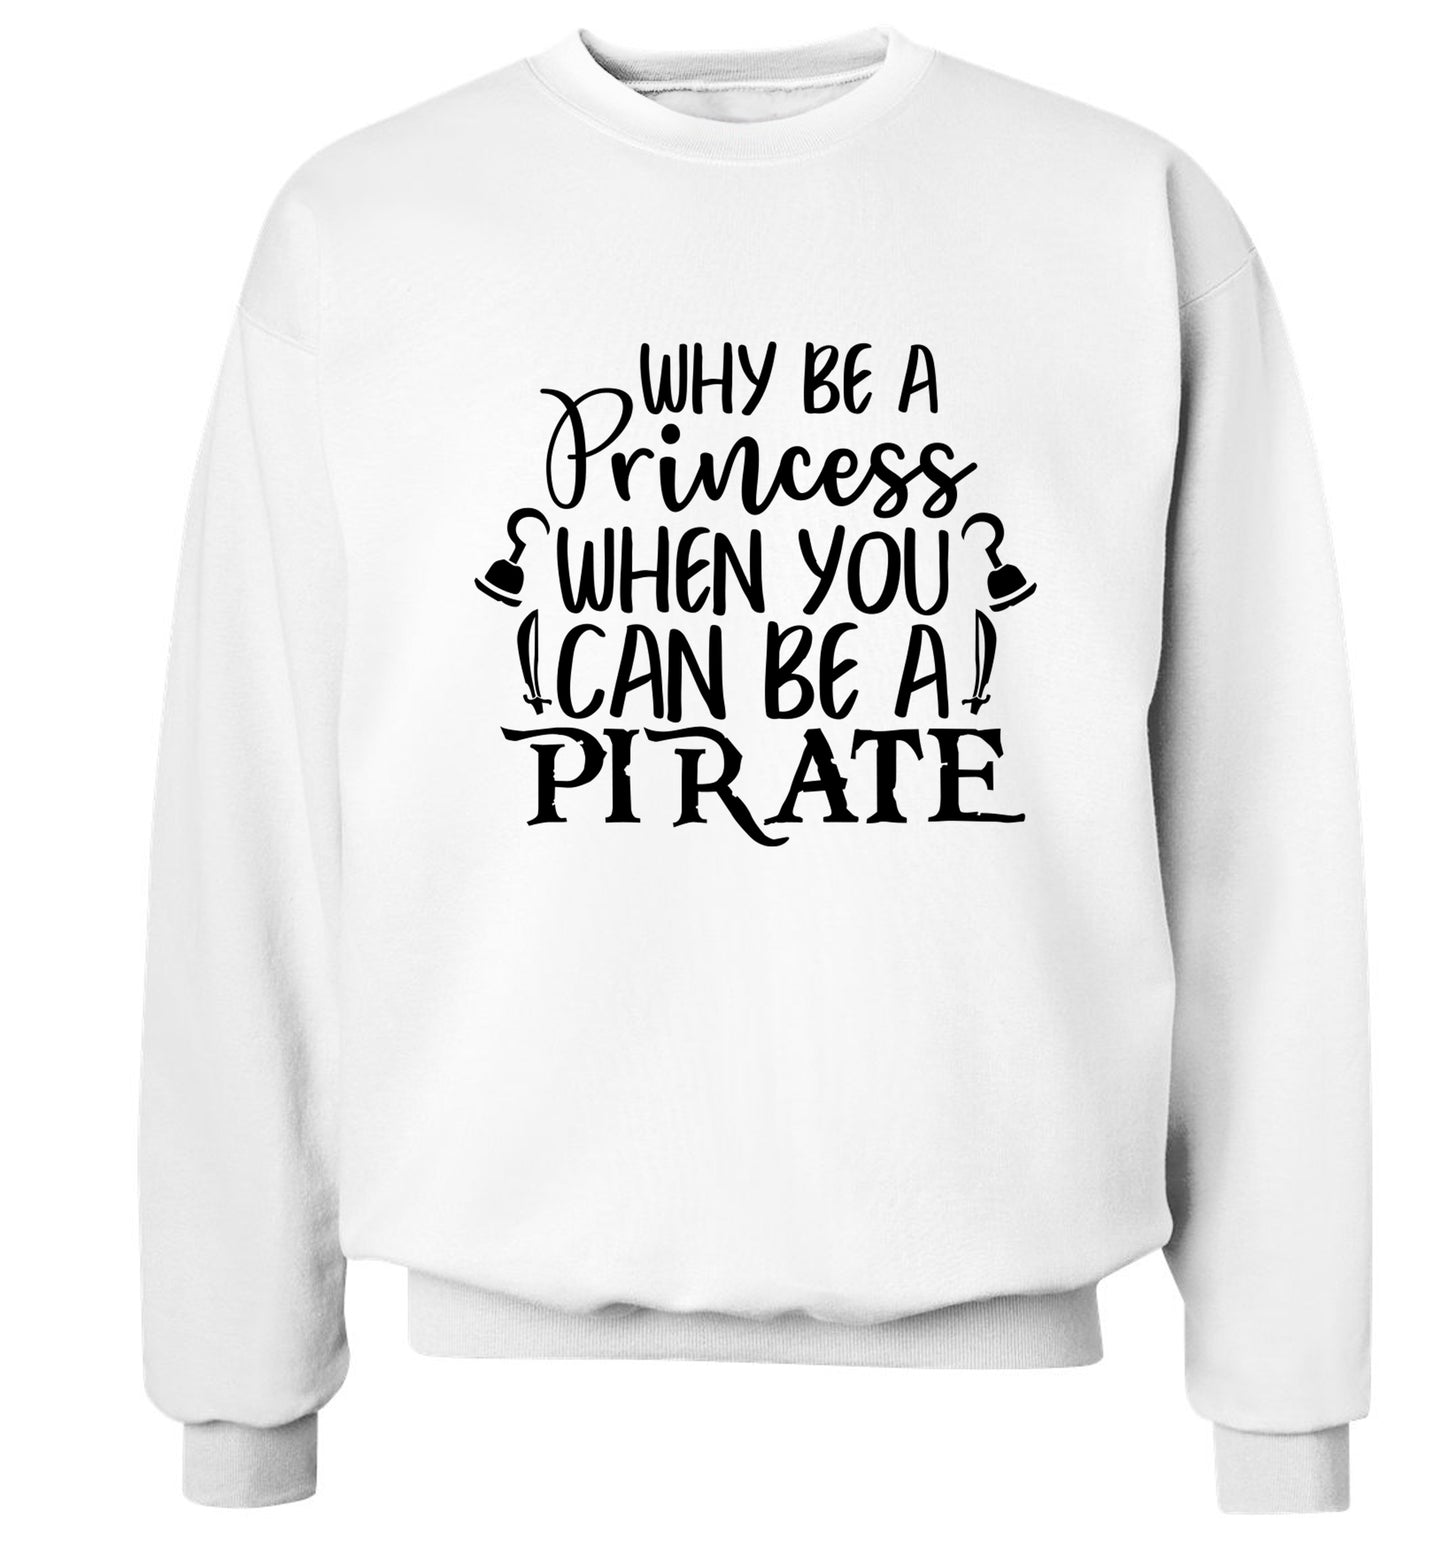 Why be a princess when you can be a pirate? Adult's unisex white Sweater 2XL